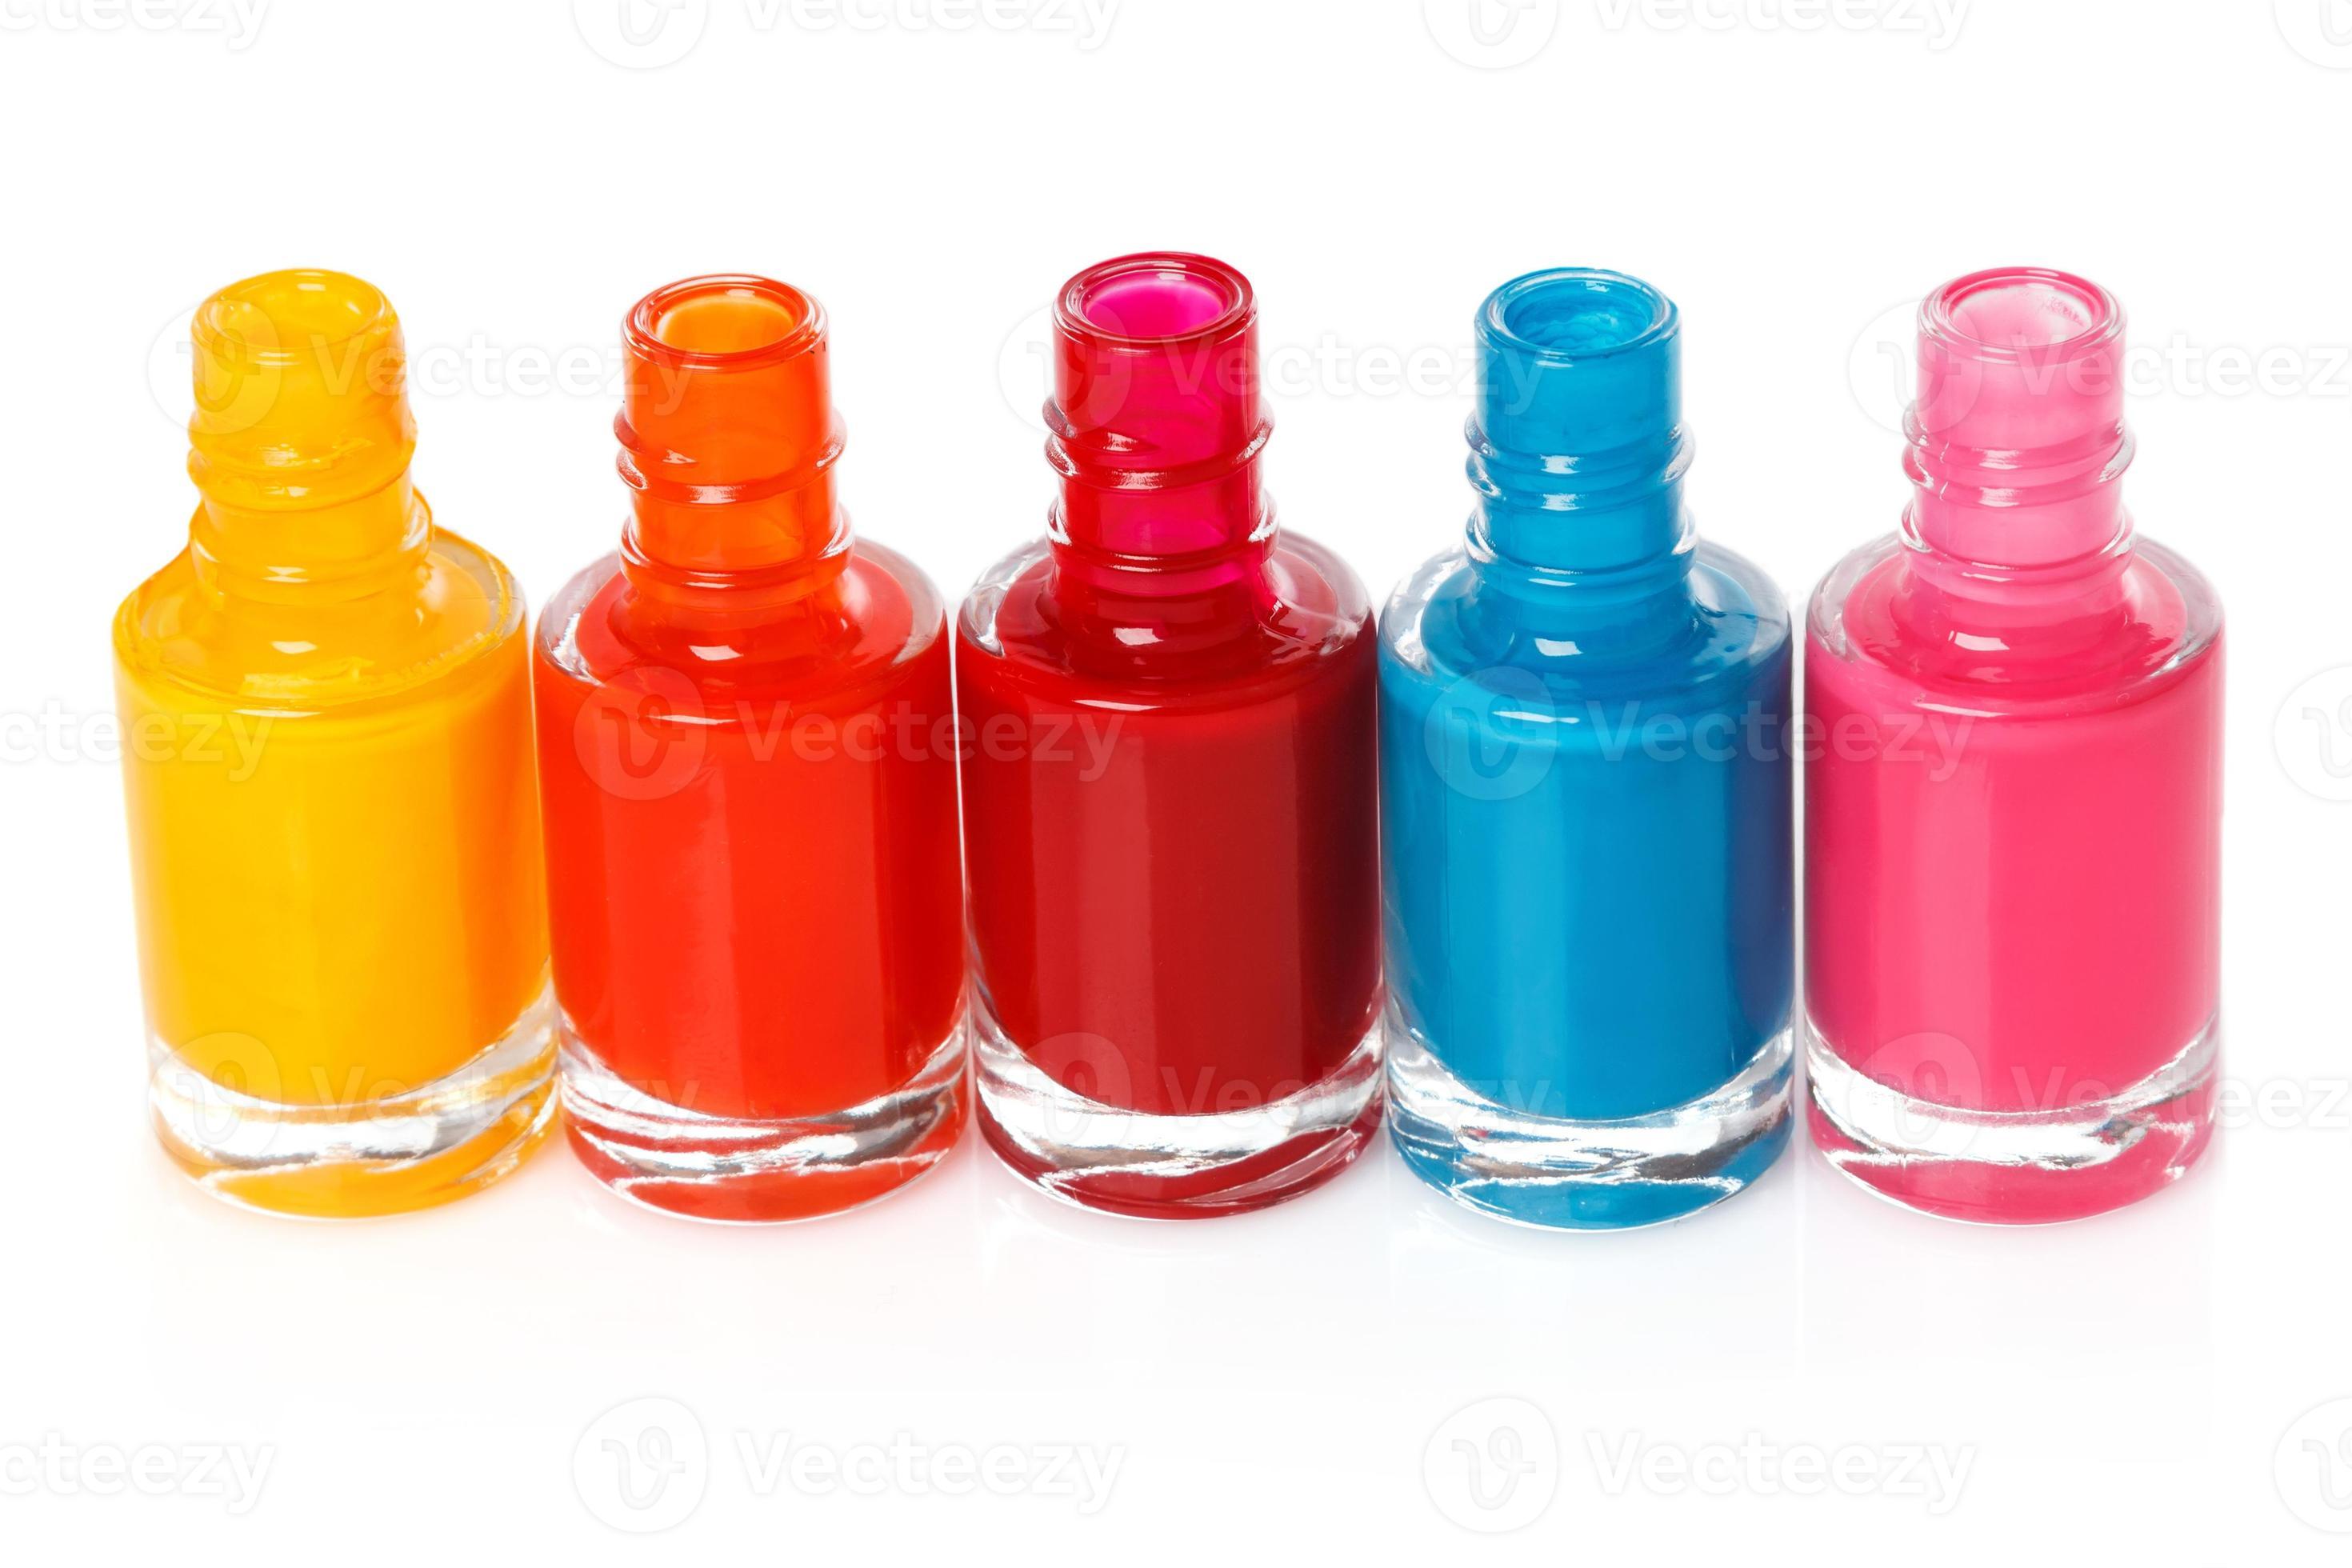 2. How to Create a Colorful Nail Polish Dish - wide 7